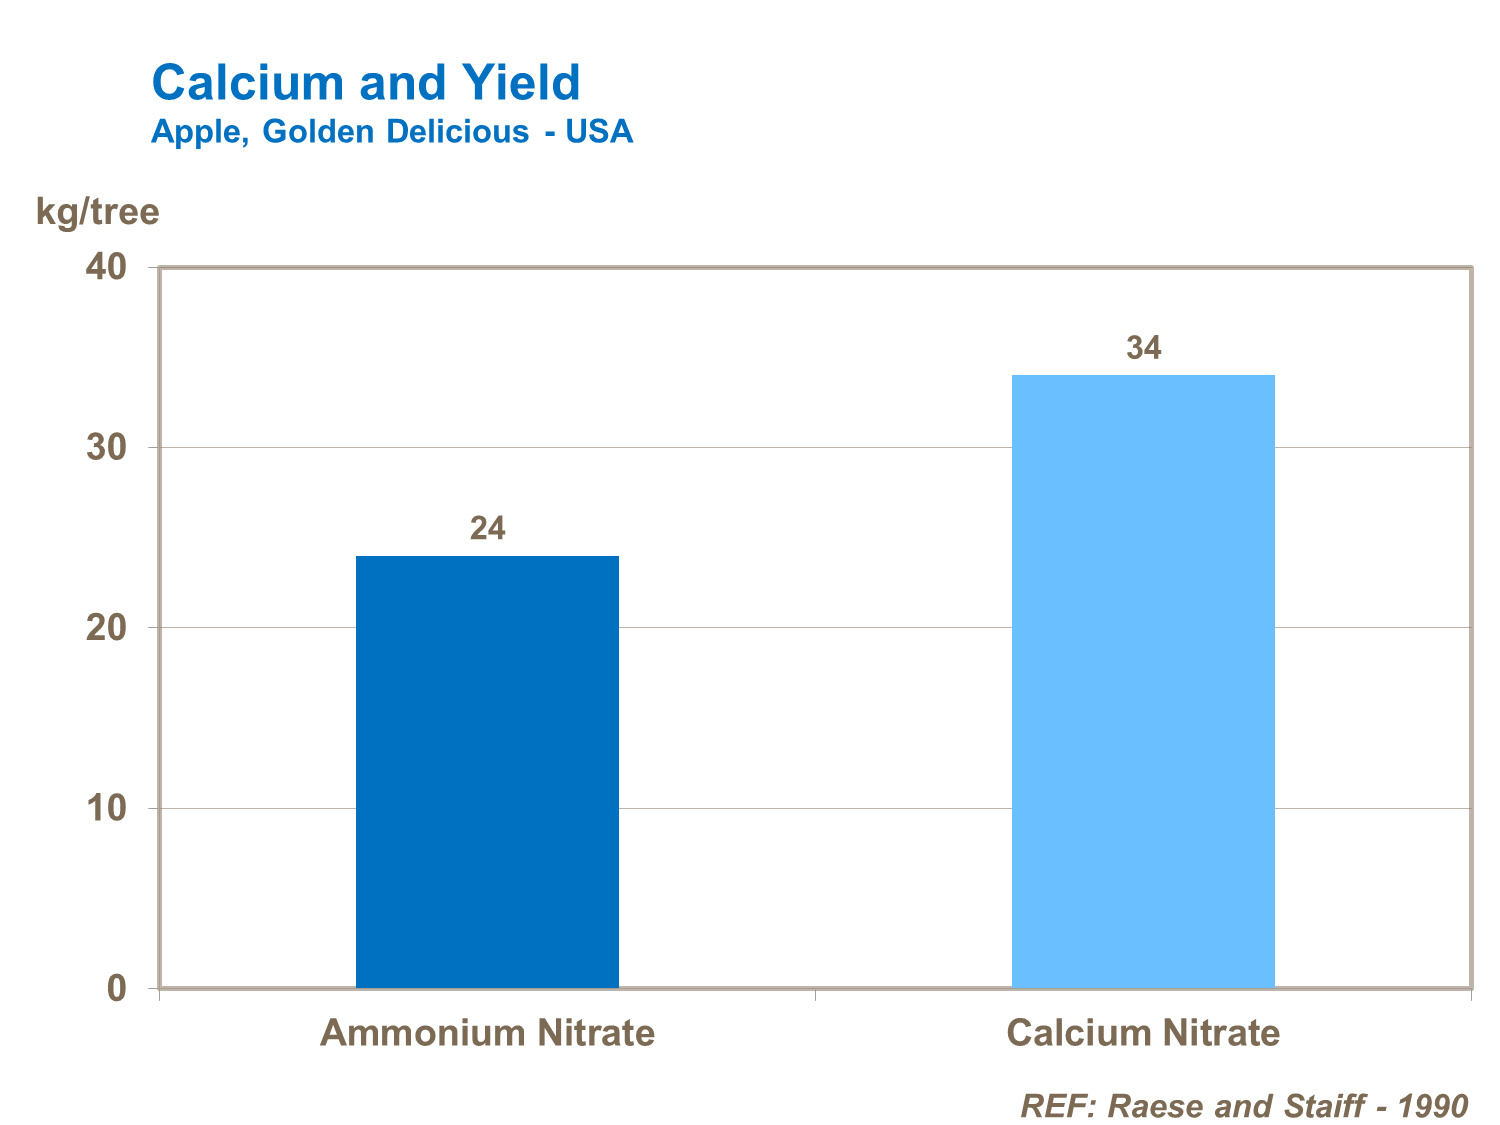 Calcium and yield